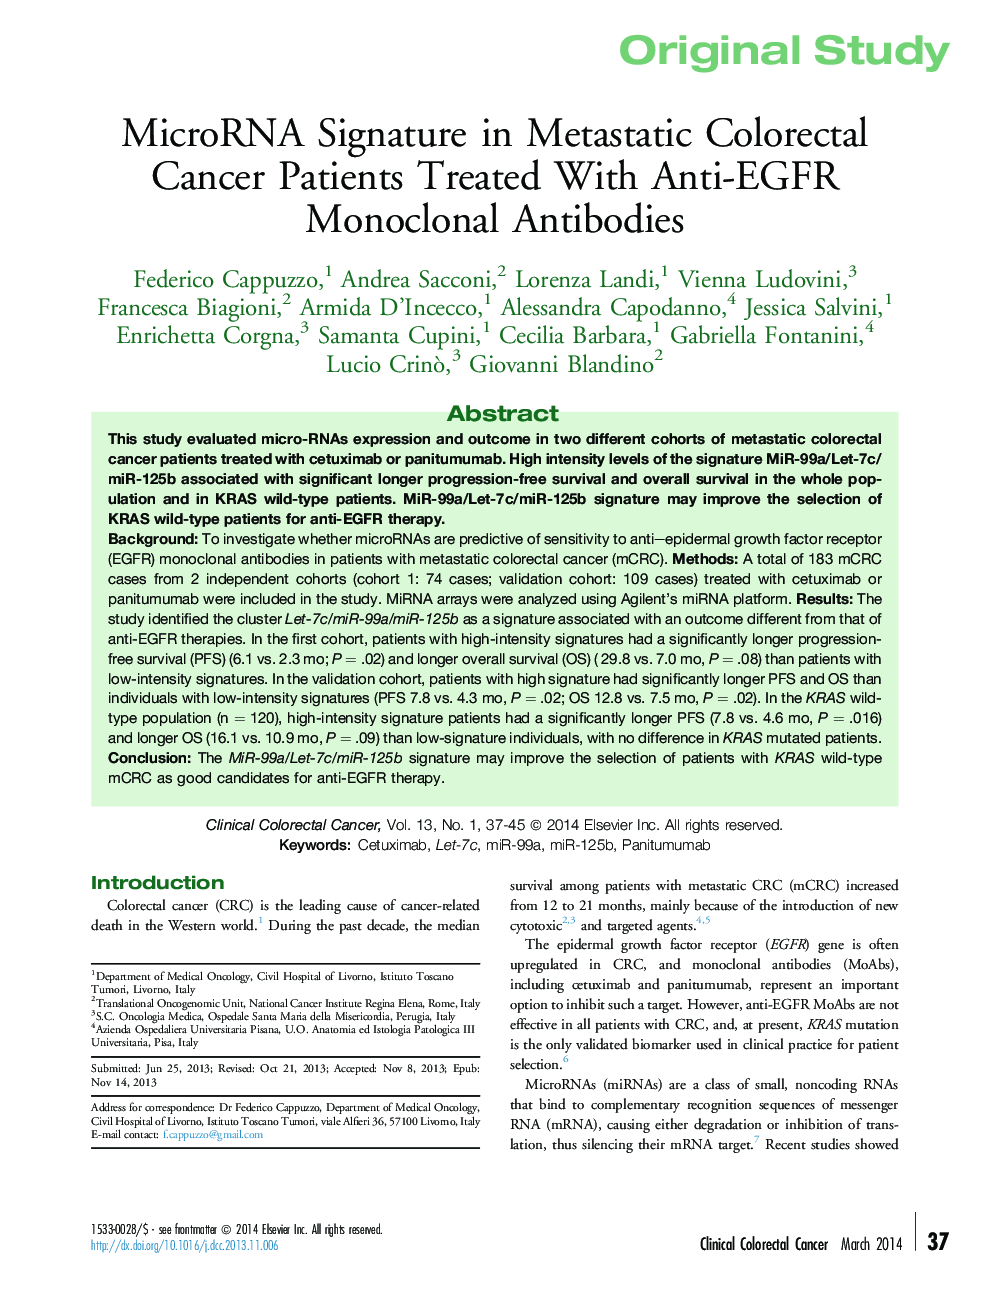 MicroRNA Signature in Metastatic Colorectal Cancer Patients Treated With Anti-EGFR Monoclonal Antibodies